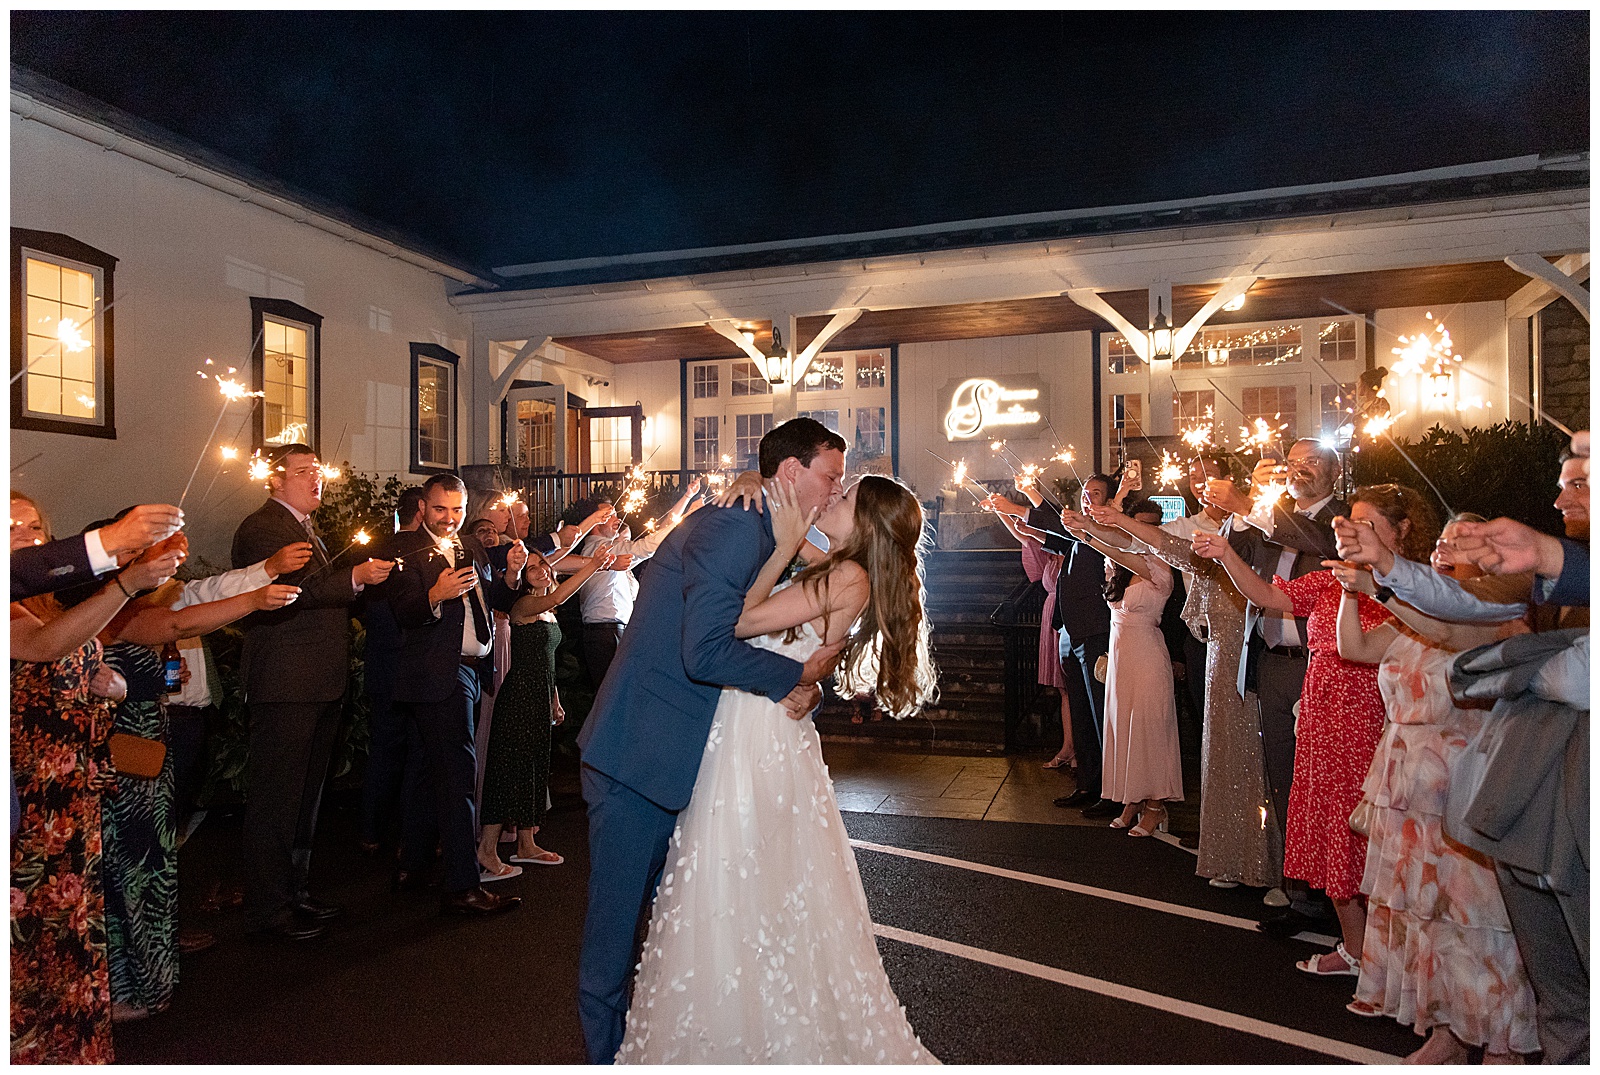 couple sharing a kissing in aisle of guests holding sparklers as they leave at nighttime from their reception at the barn at silverstone